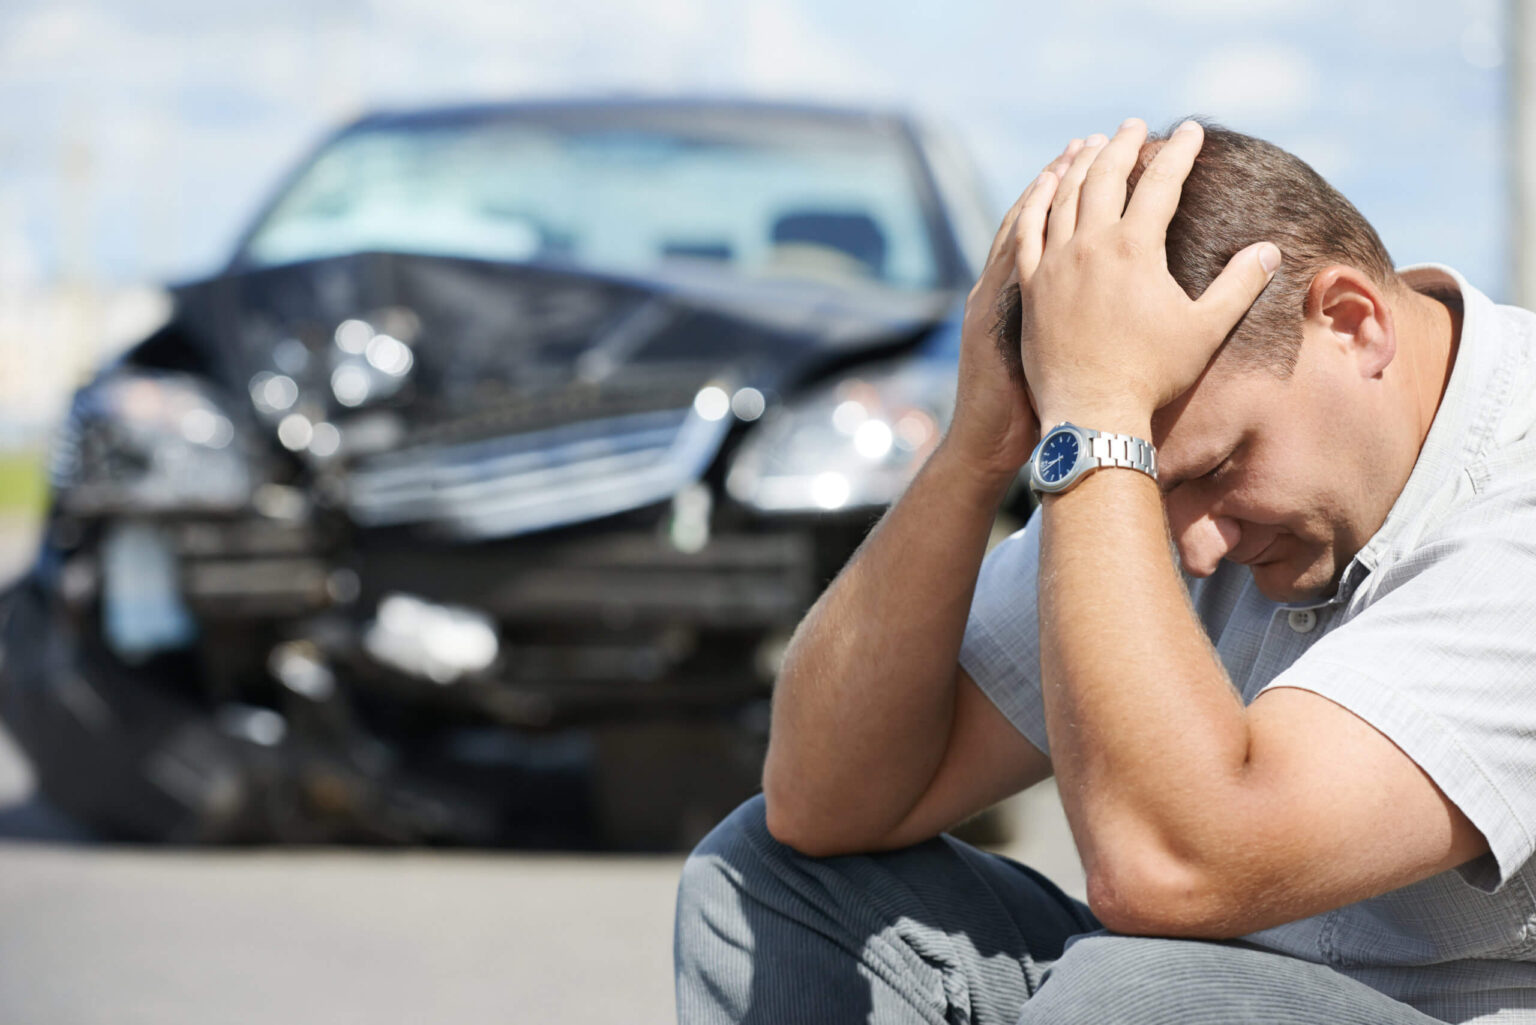 can i get a settlement for a car accident without a lawyer